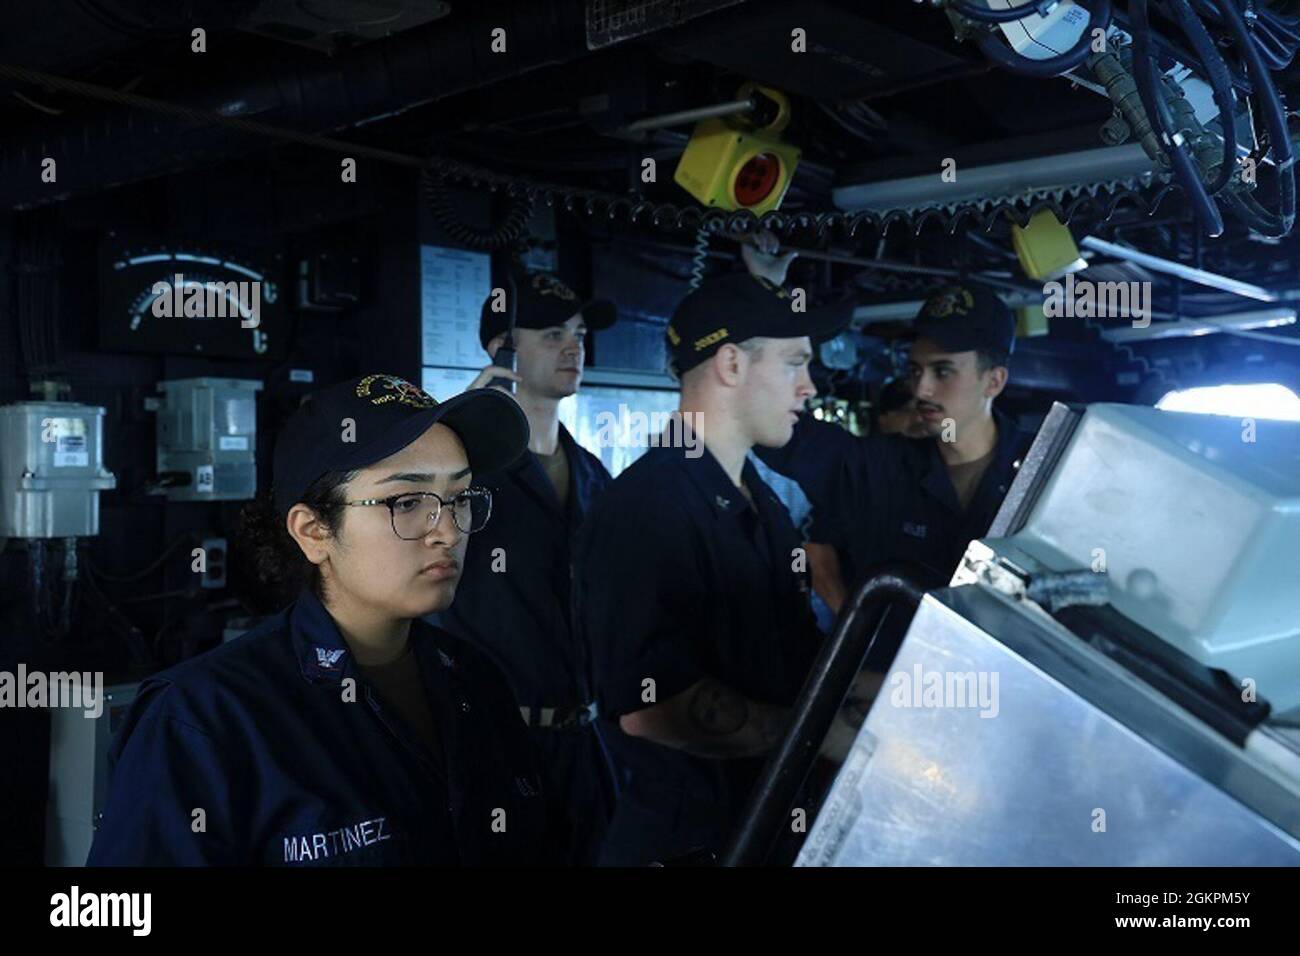 210703-N-LJ478-1002 PACIFIC OCEAN(July 3, 2021) Gas Turbine Systems Technician Electrical 3rd Class Krystal Martinez controls the throttle as lee helmsman during a sea and anchor evolution aboard the Arleigh Burke-class destroyer USS Michael Murphy (DDG 112) July 3, 2021. Michael Murphy is conducting routine operations underway in the U.S. 3rd Fleet area of operations. Stock Photo